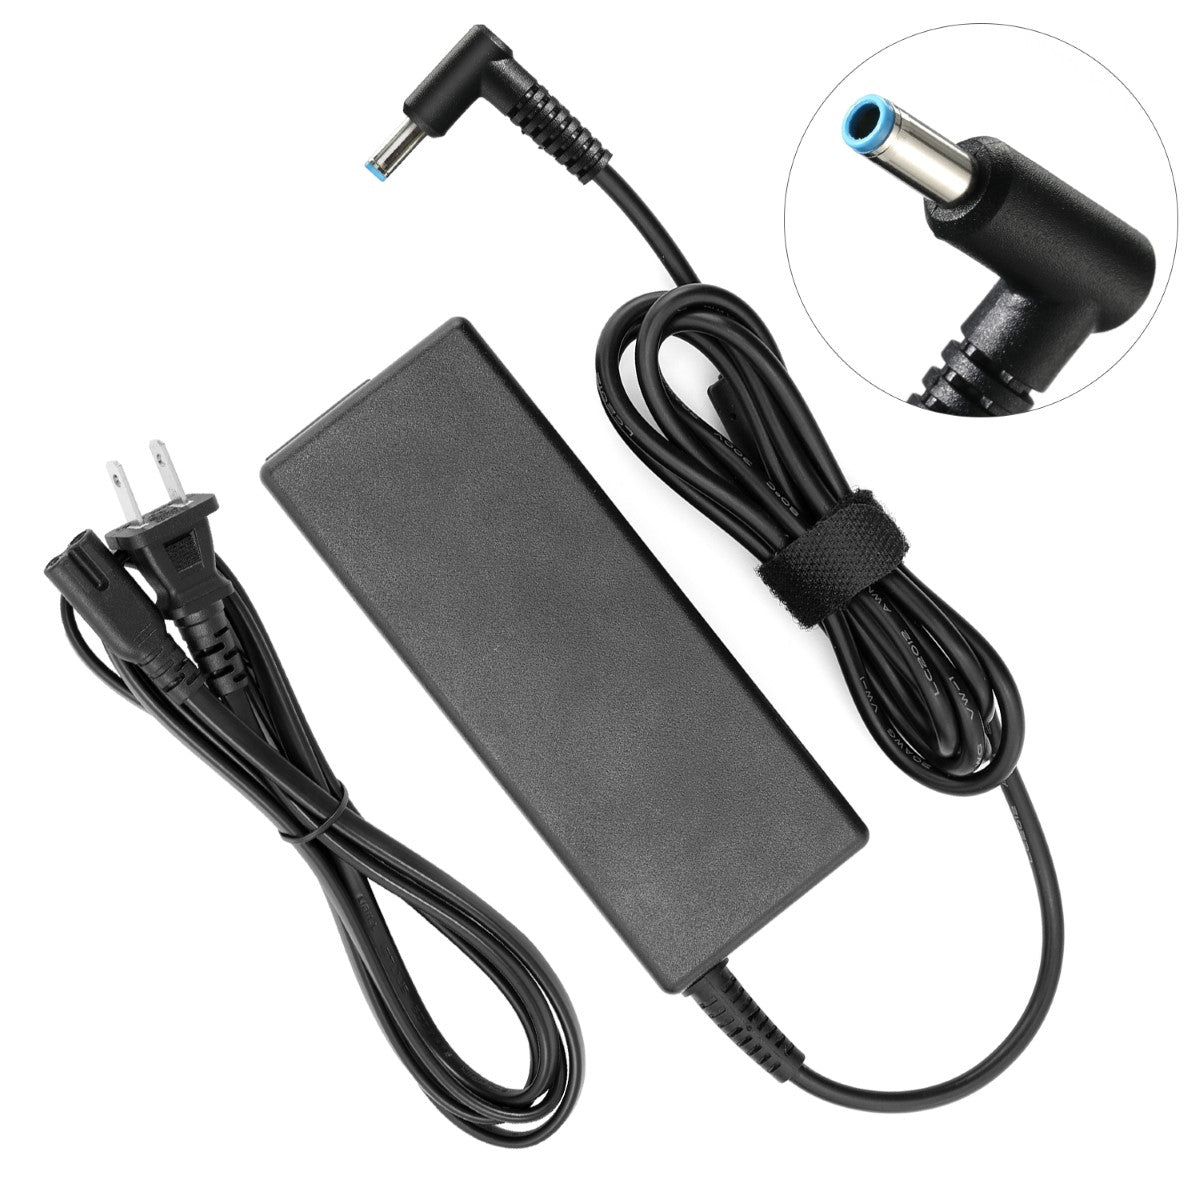 AC Adapter Charger for HP Envy TouchSmart 15-j085nr Notebook.